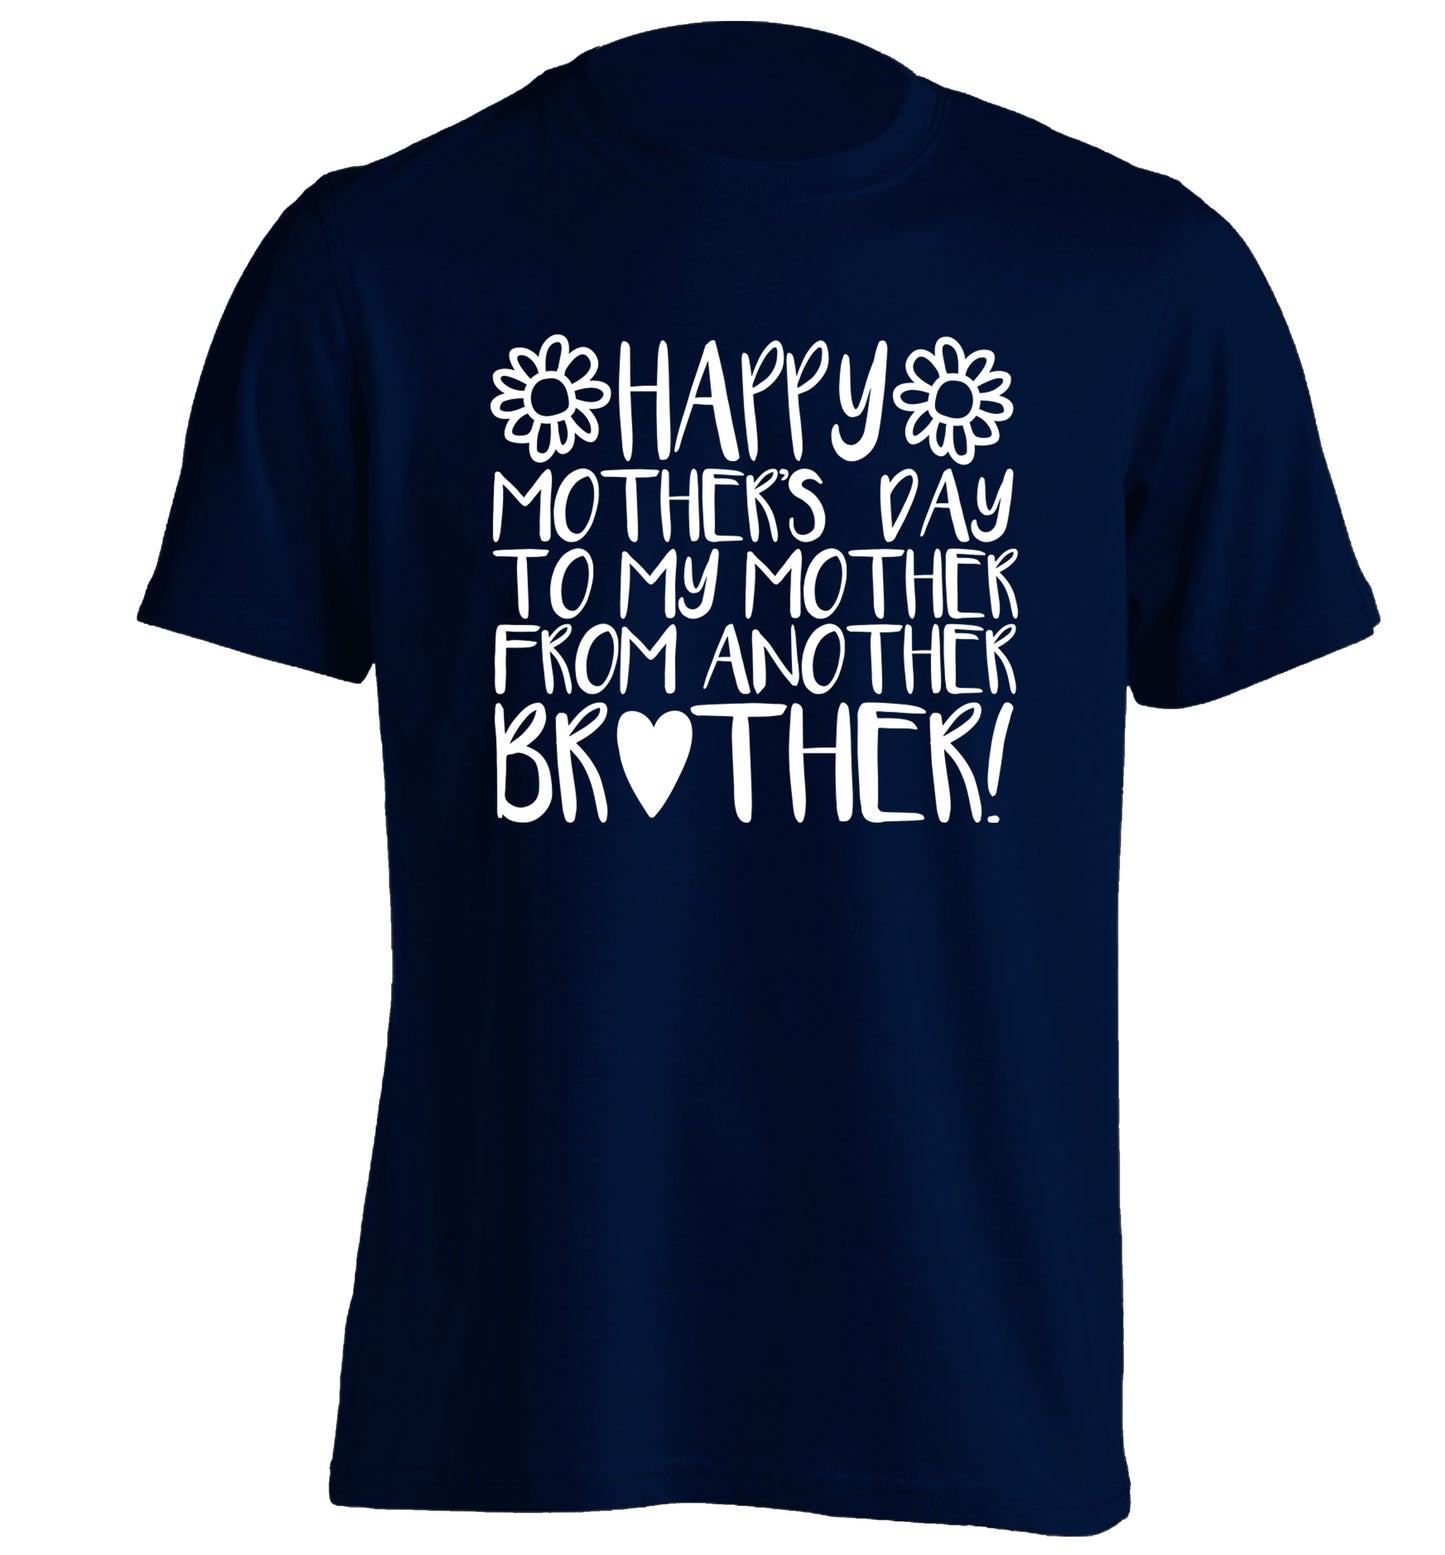 Happy mother's day to my mother from another brother adults unisex navy Tshirt 2XL